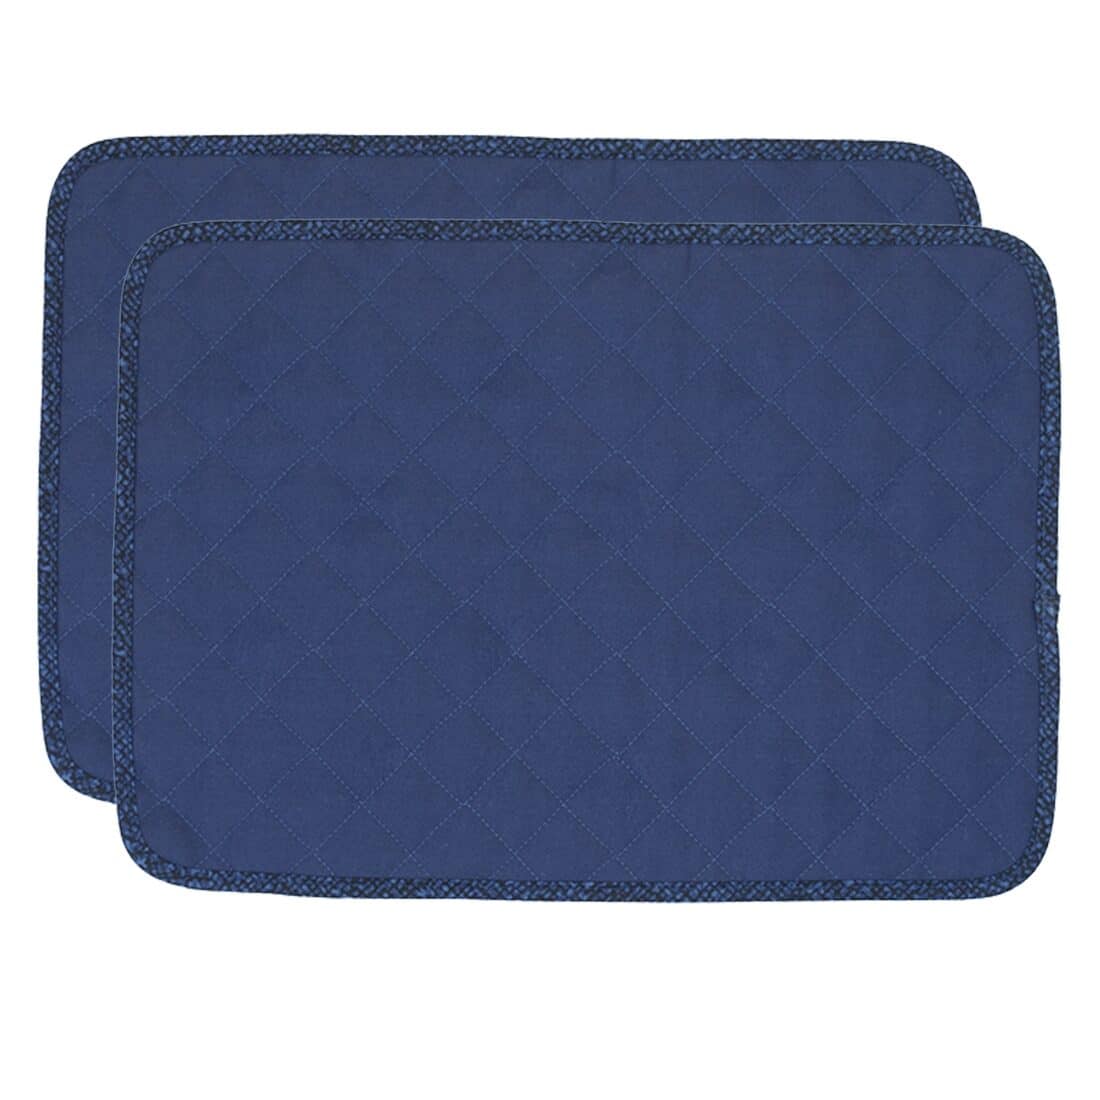 Sweet Pea Linens - Dark Royal Blue Cobblestone Quilted Jacquard Rectangle Placemats - Set of Two (SKU#: RS2-1001-Y30) - Main Product Image